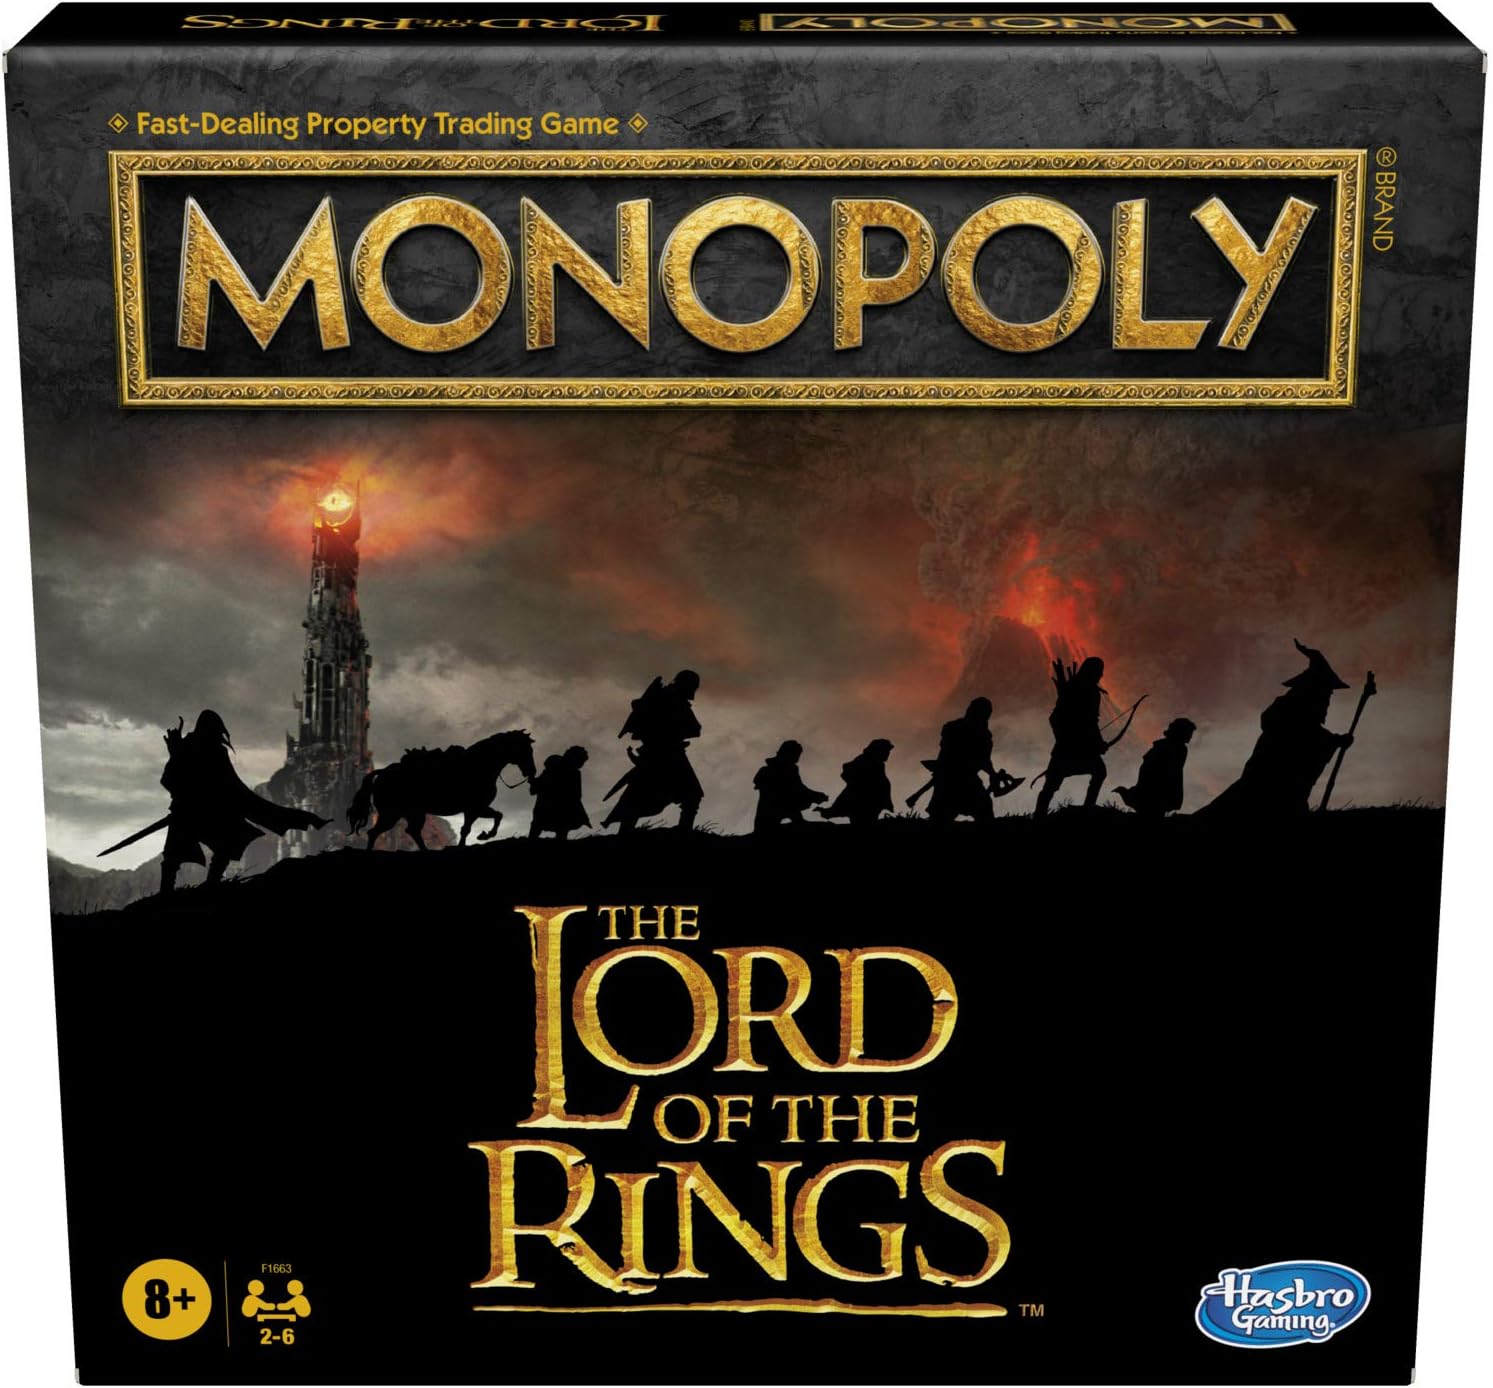 Hasbro Gaming - Monopoly: The Lord of the Rings Edition